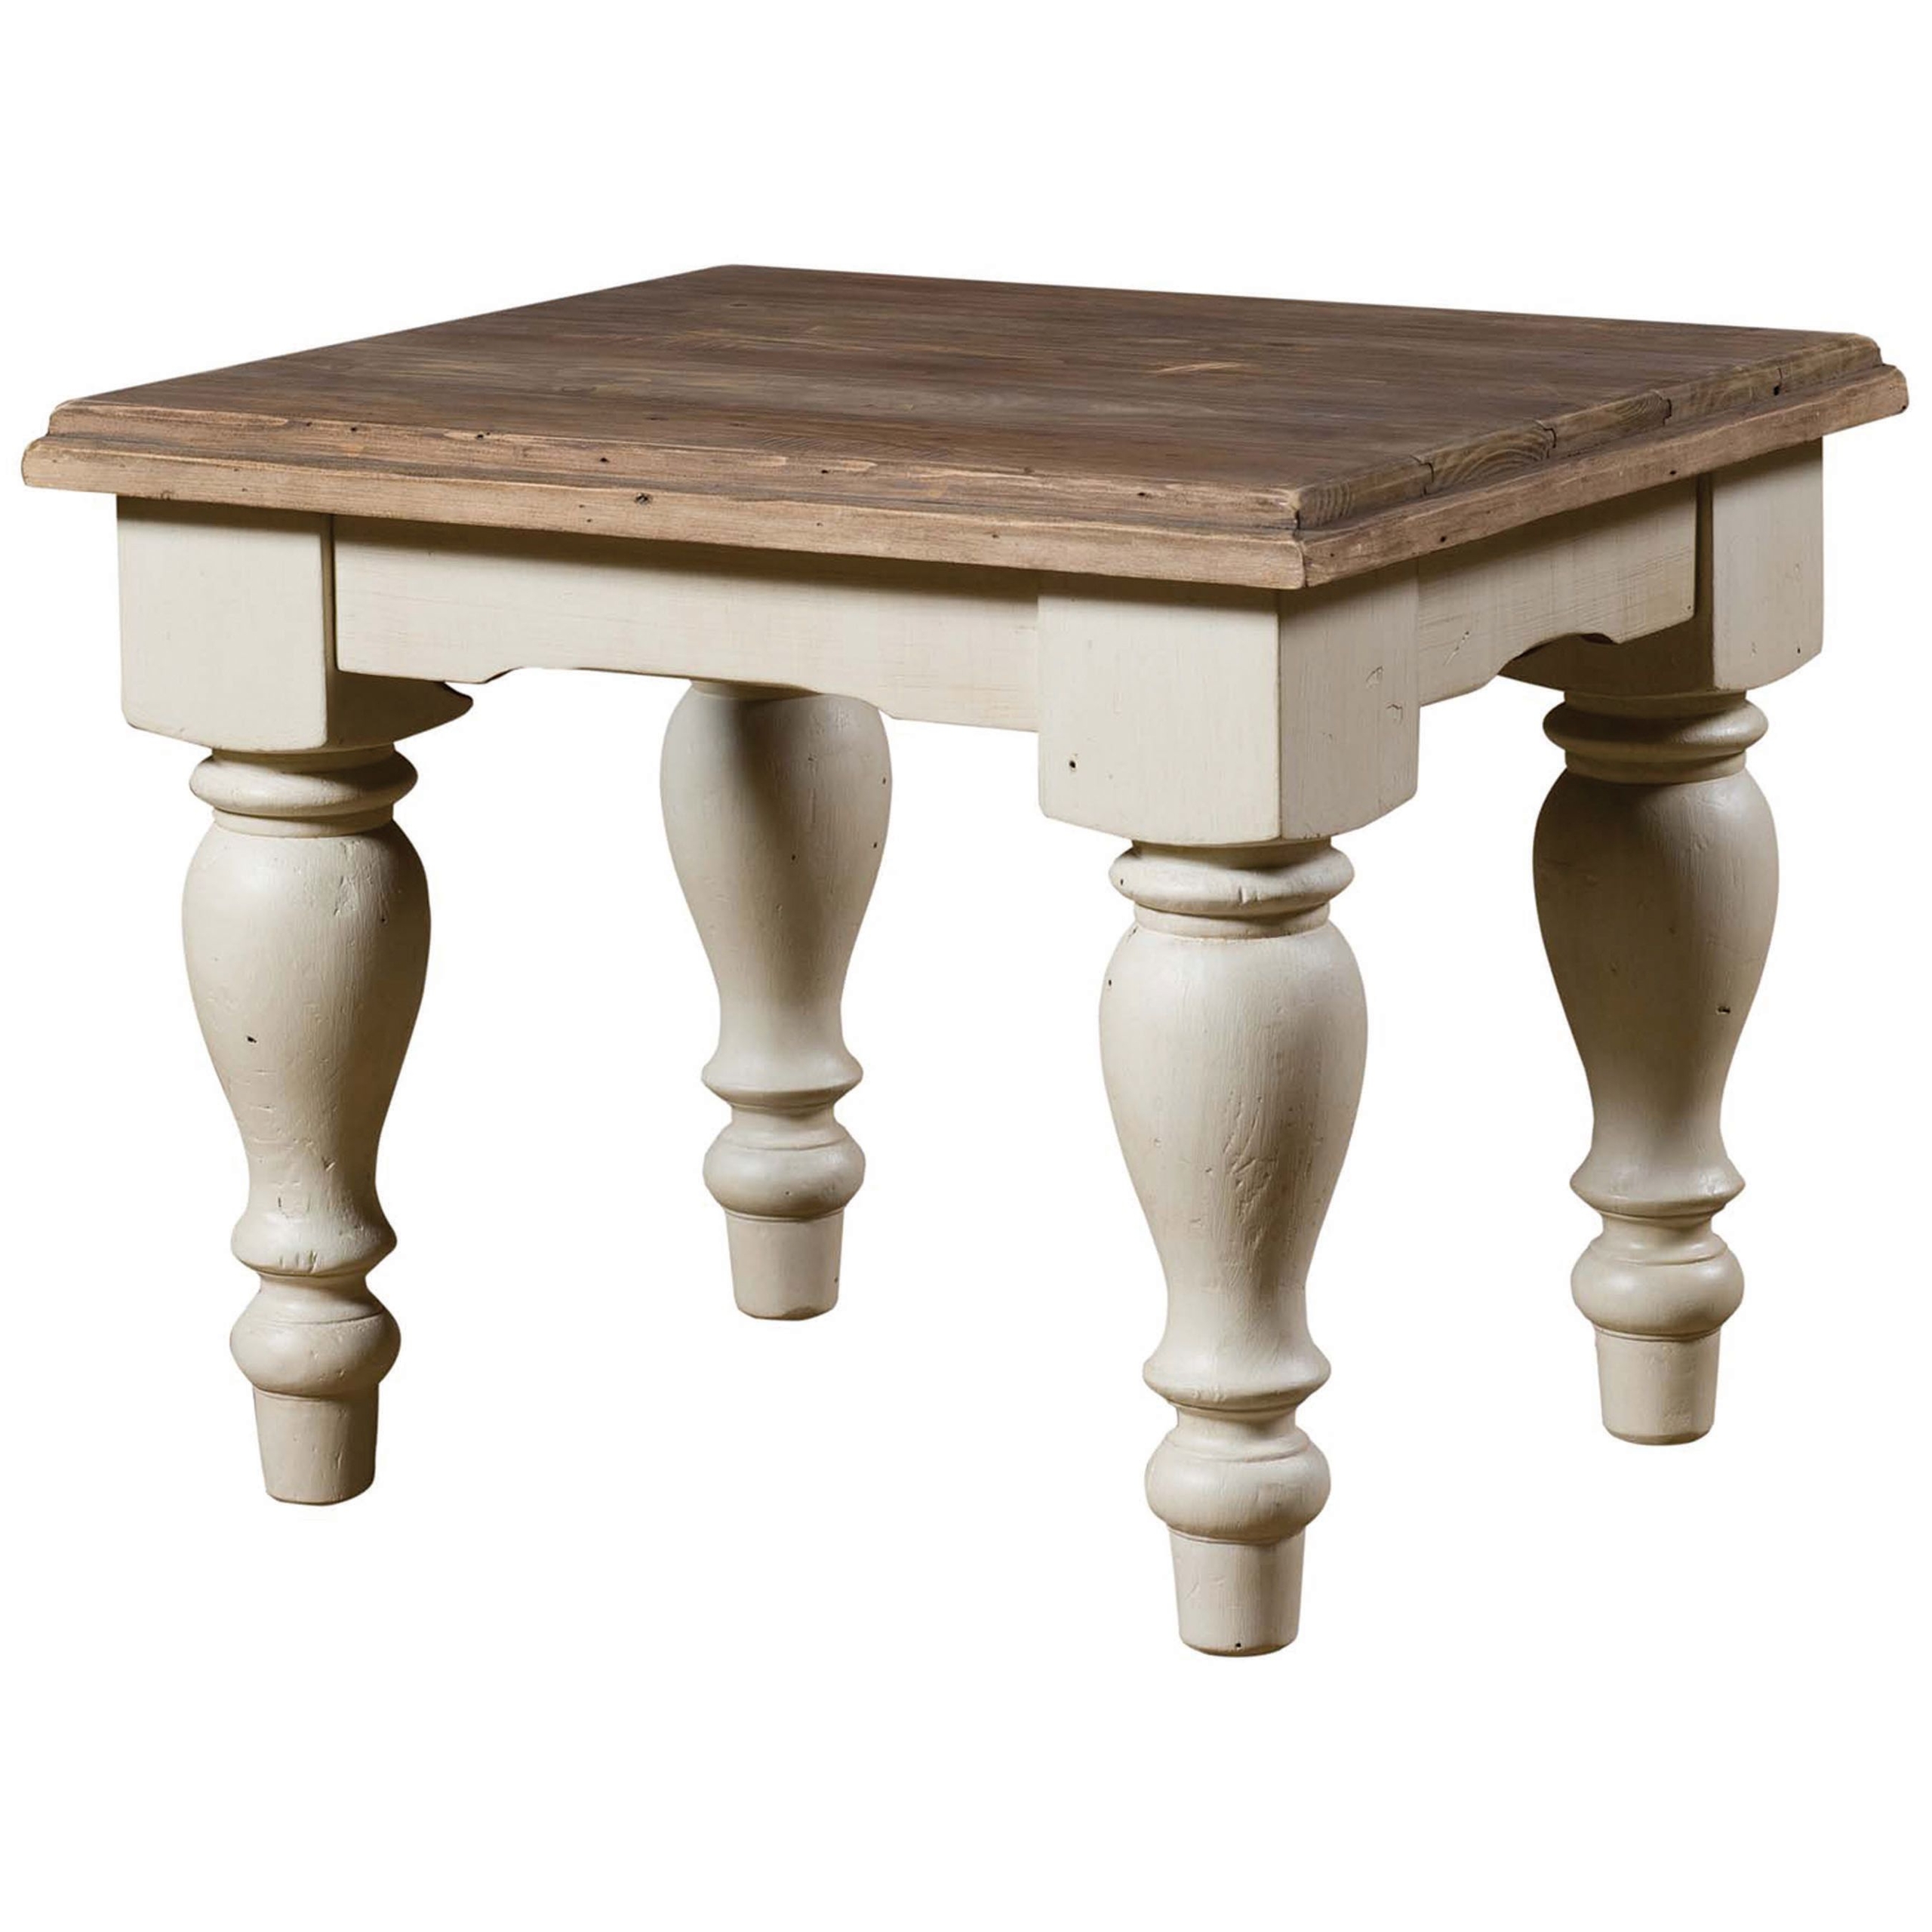 French country solid wood end table with turned legs